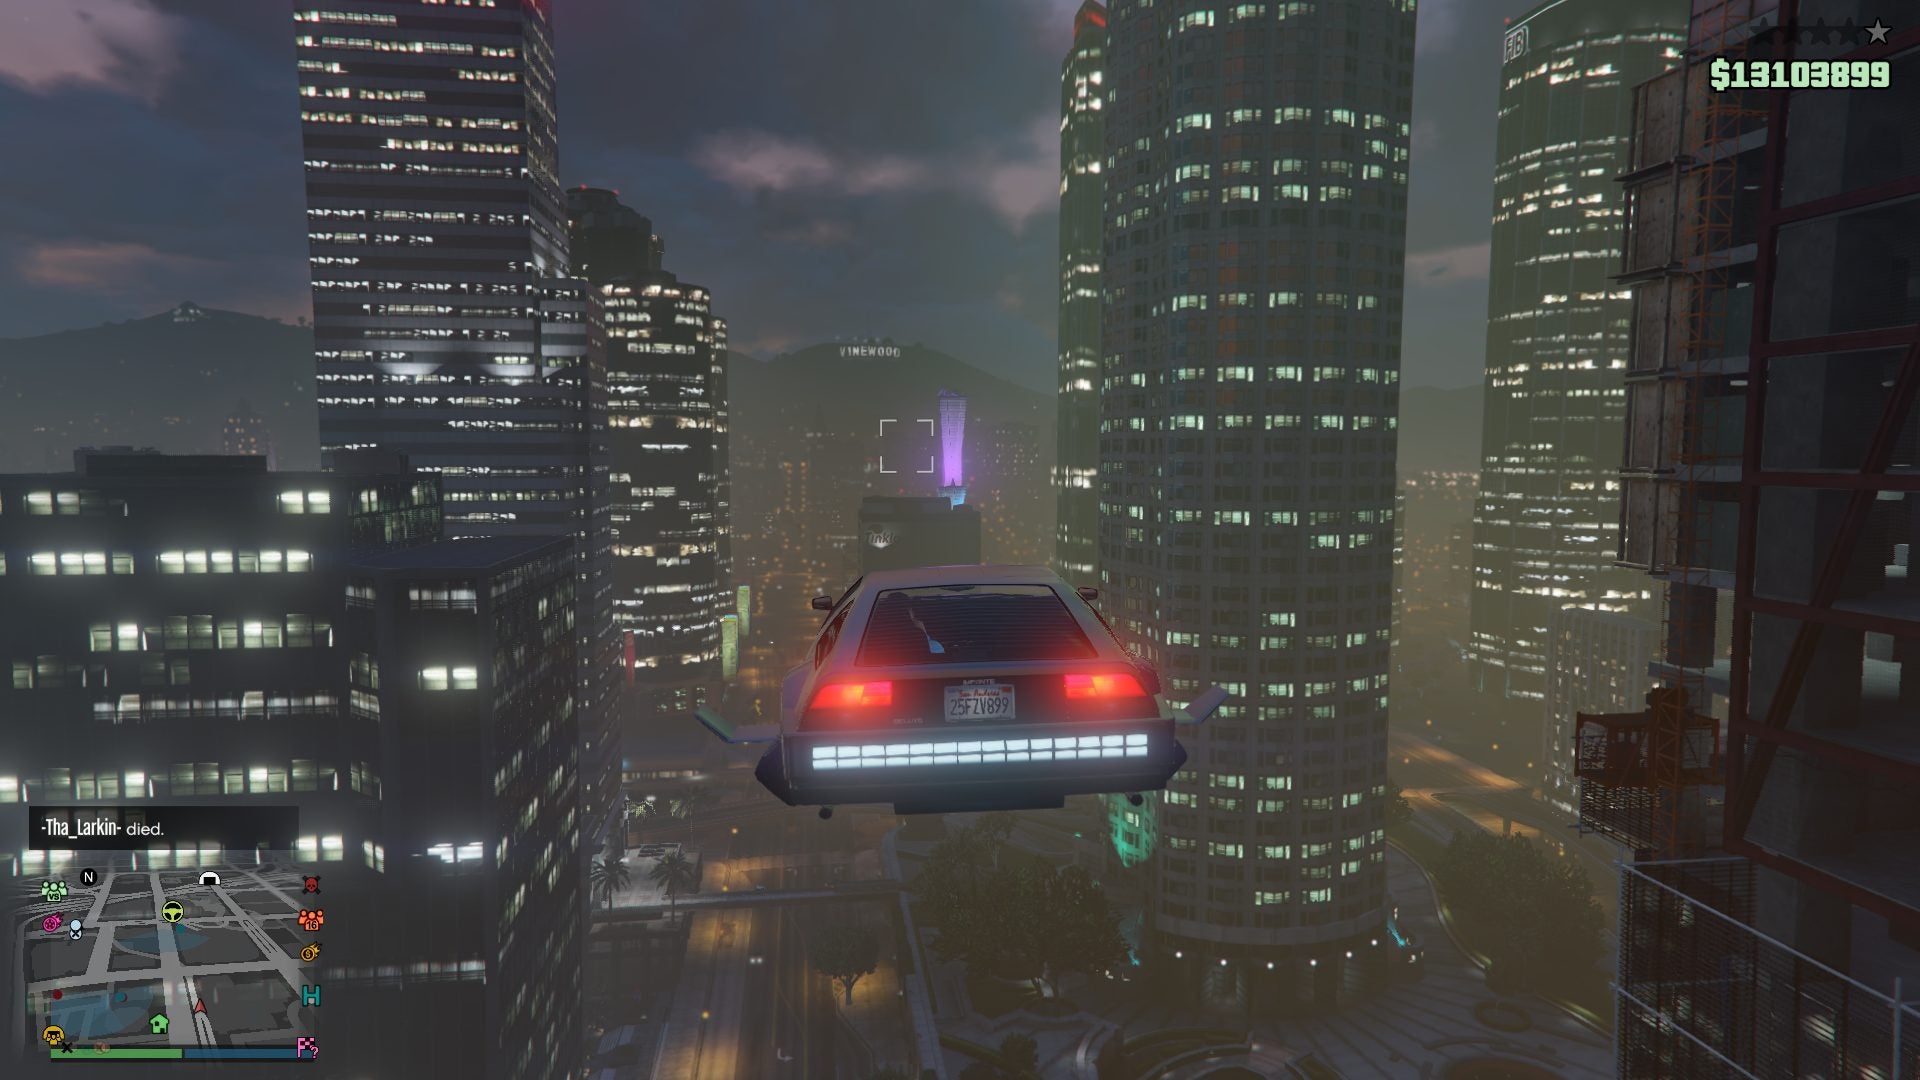 are there any graphics mods for gta 5 on stea.